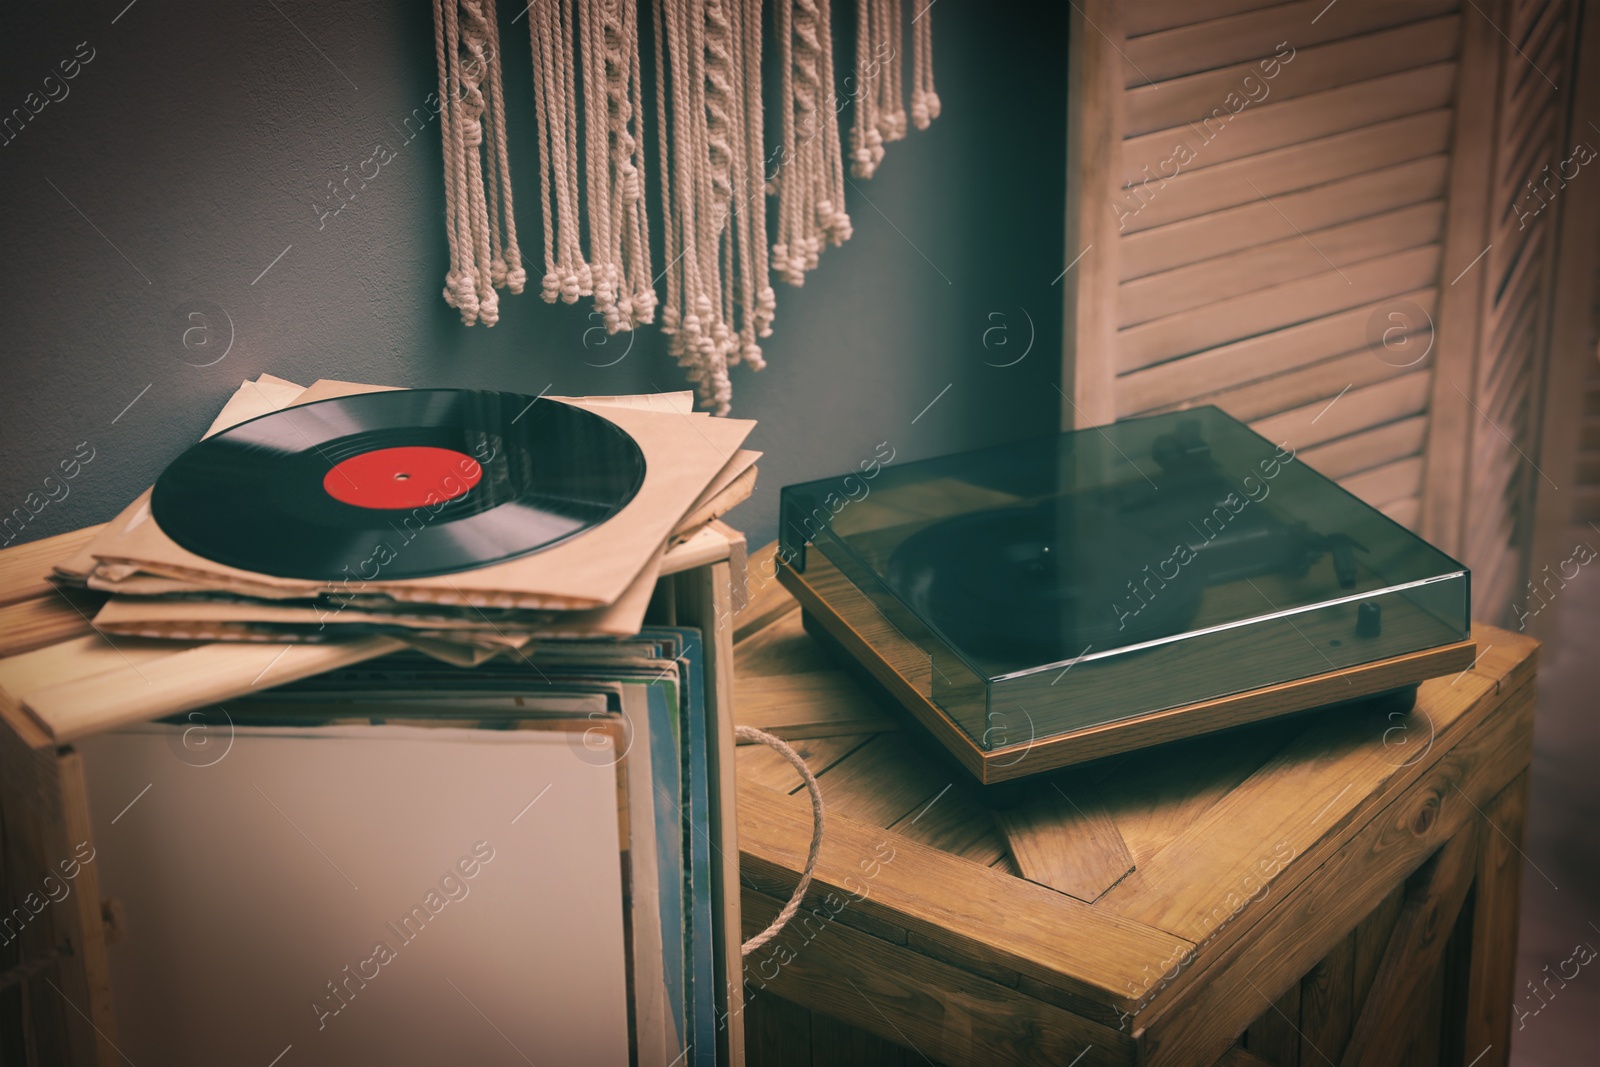 Image of Stylish turntable on wooden crate in room